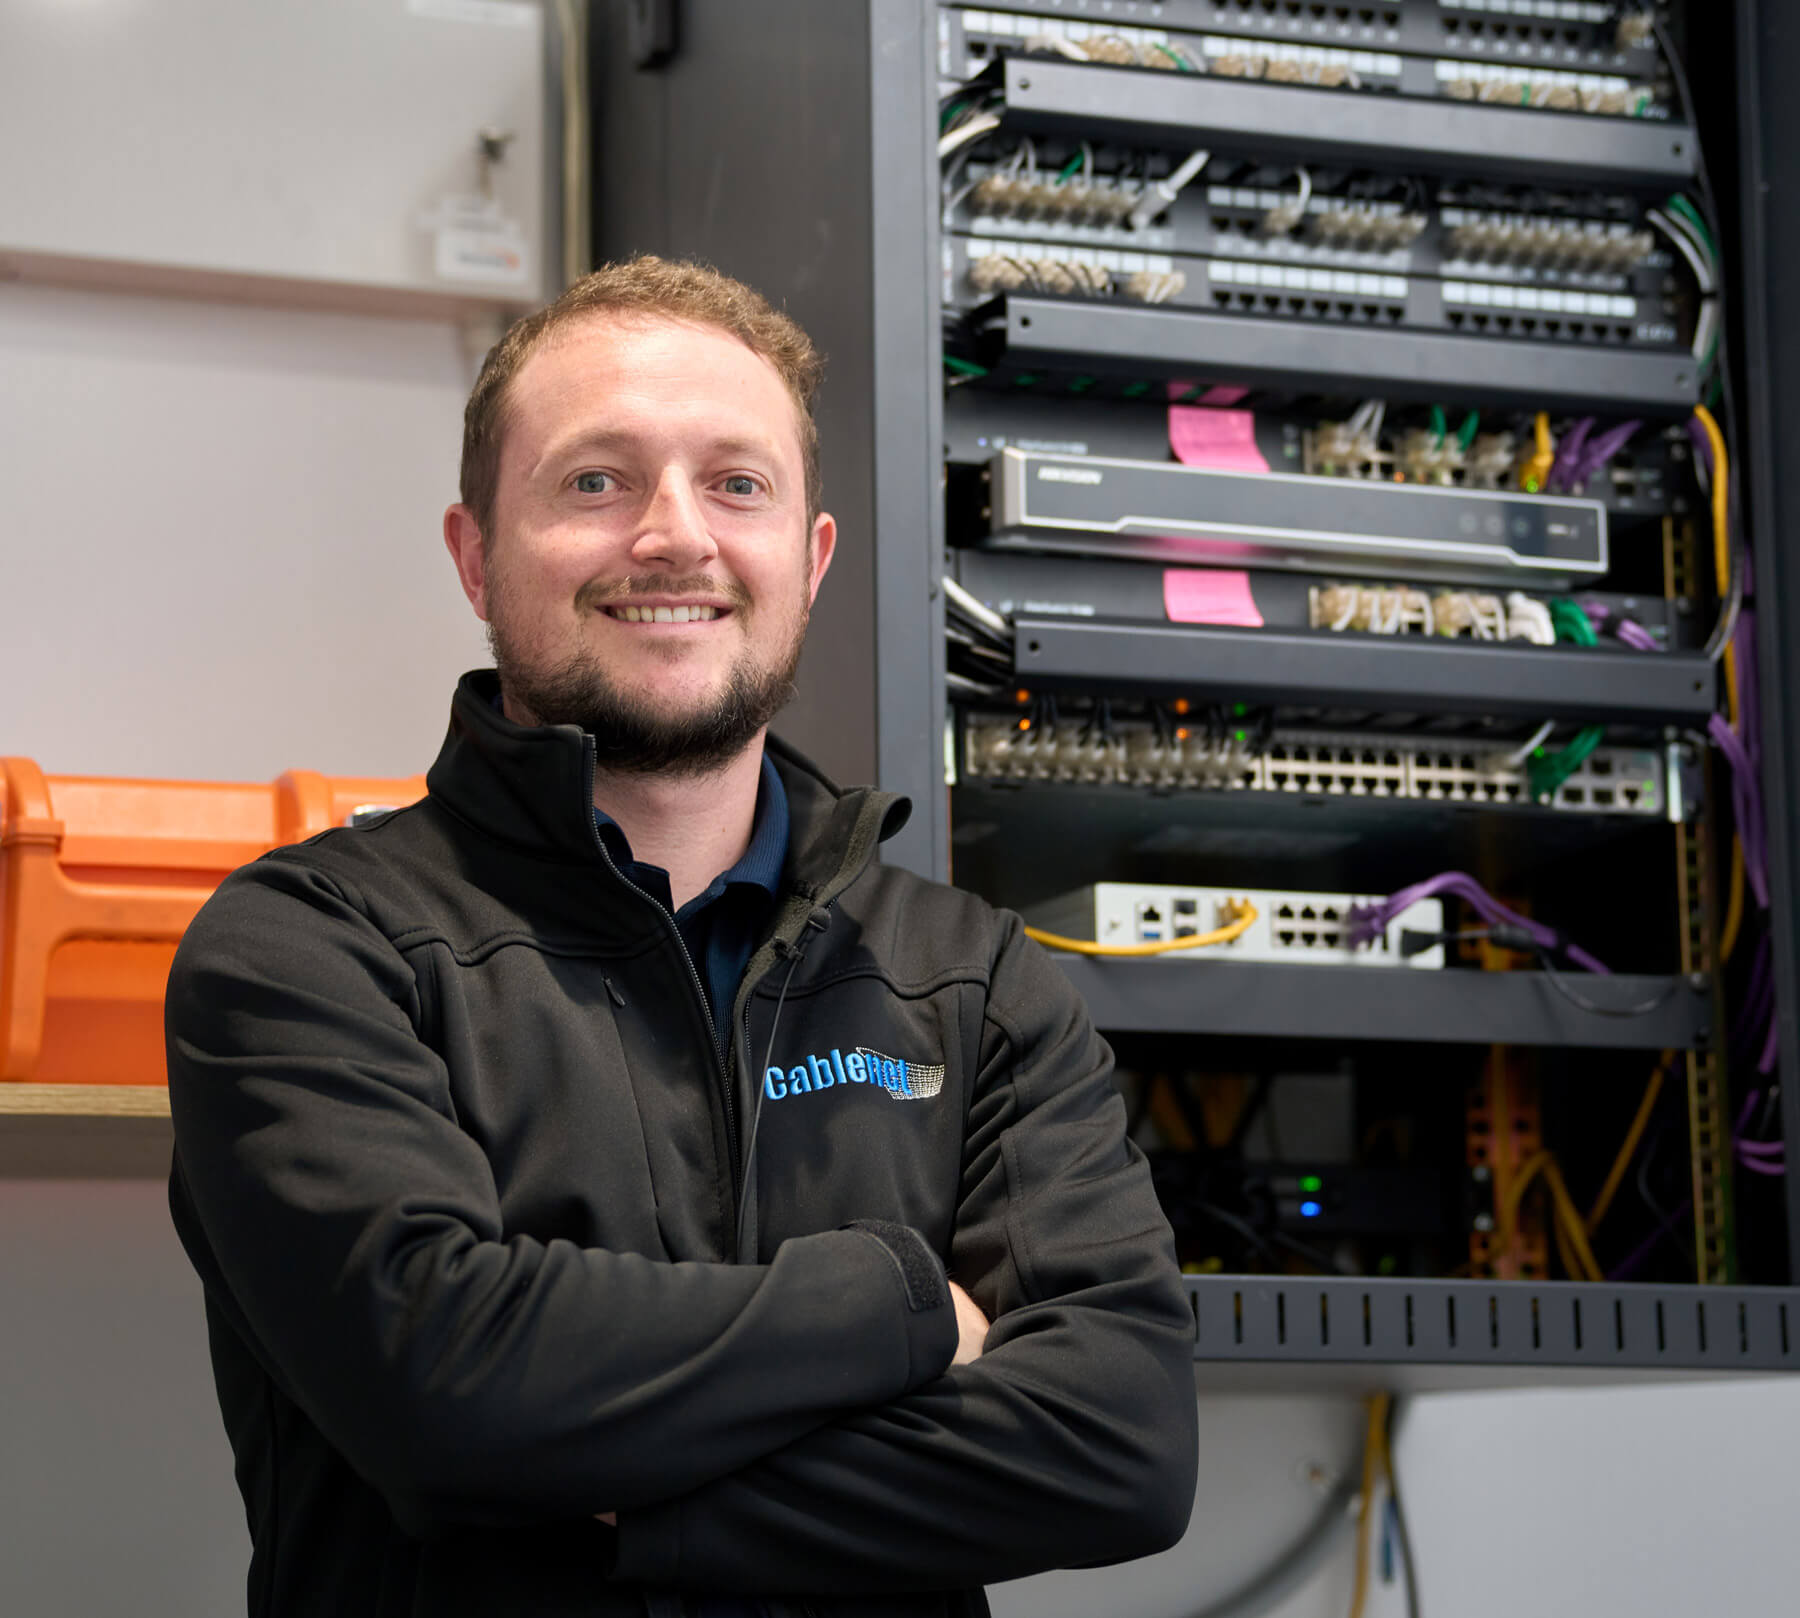 Cablenet Employee standing next to a server terminal